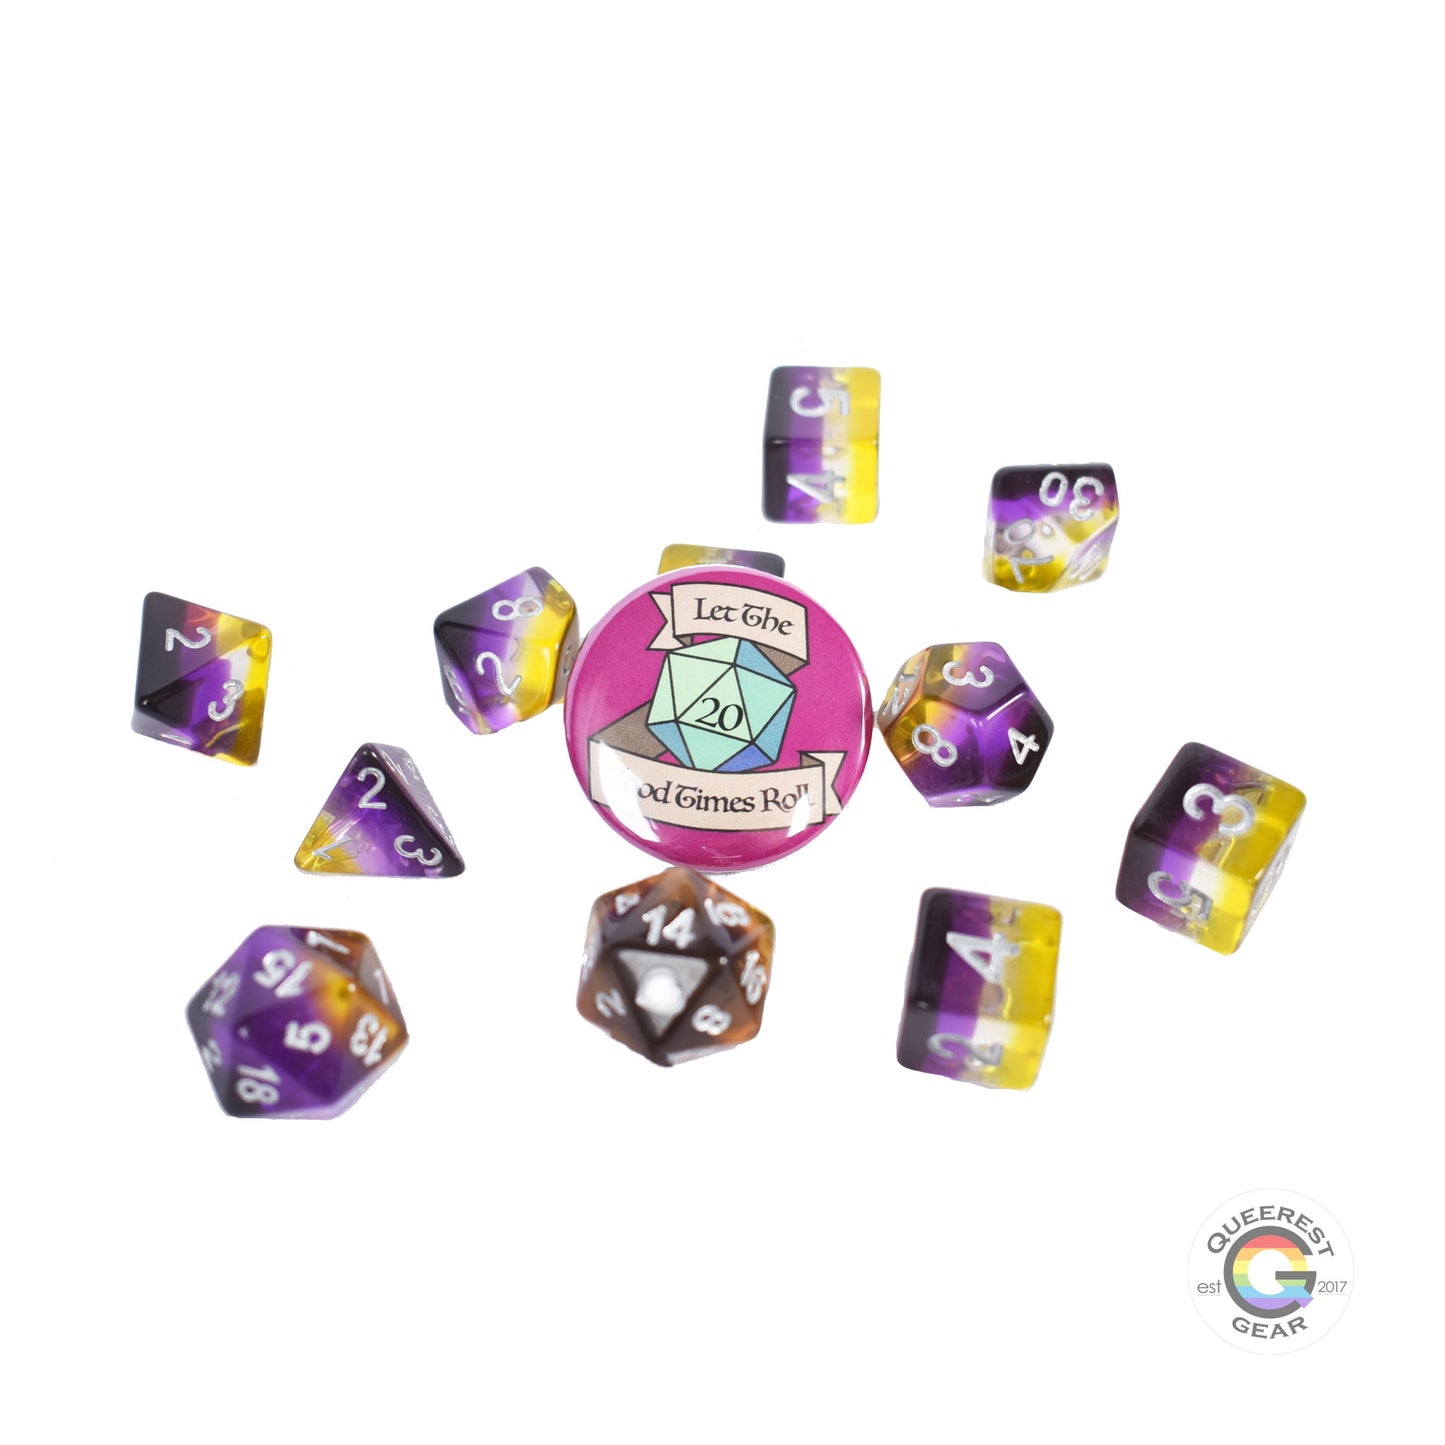 11 piece set of polyhedral dice scattered on a white background. They are transparent and colored in the stripes of the nonbinary flag with silver ink. There is the freebie “let the good times roll” pinback button among them. 